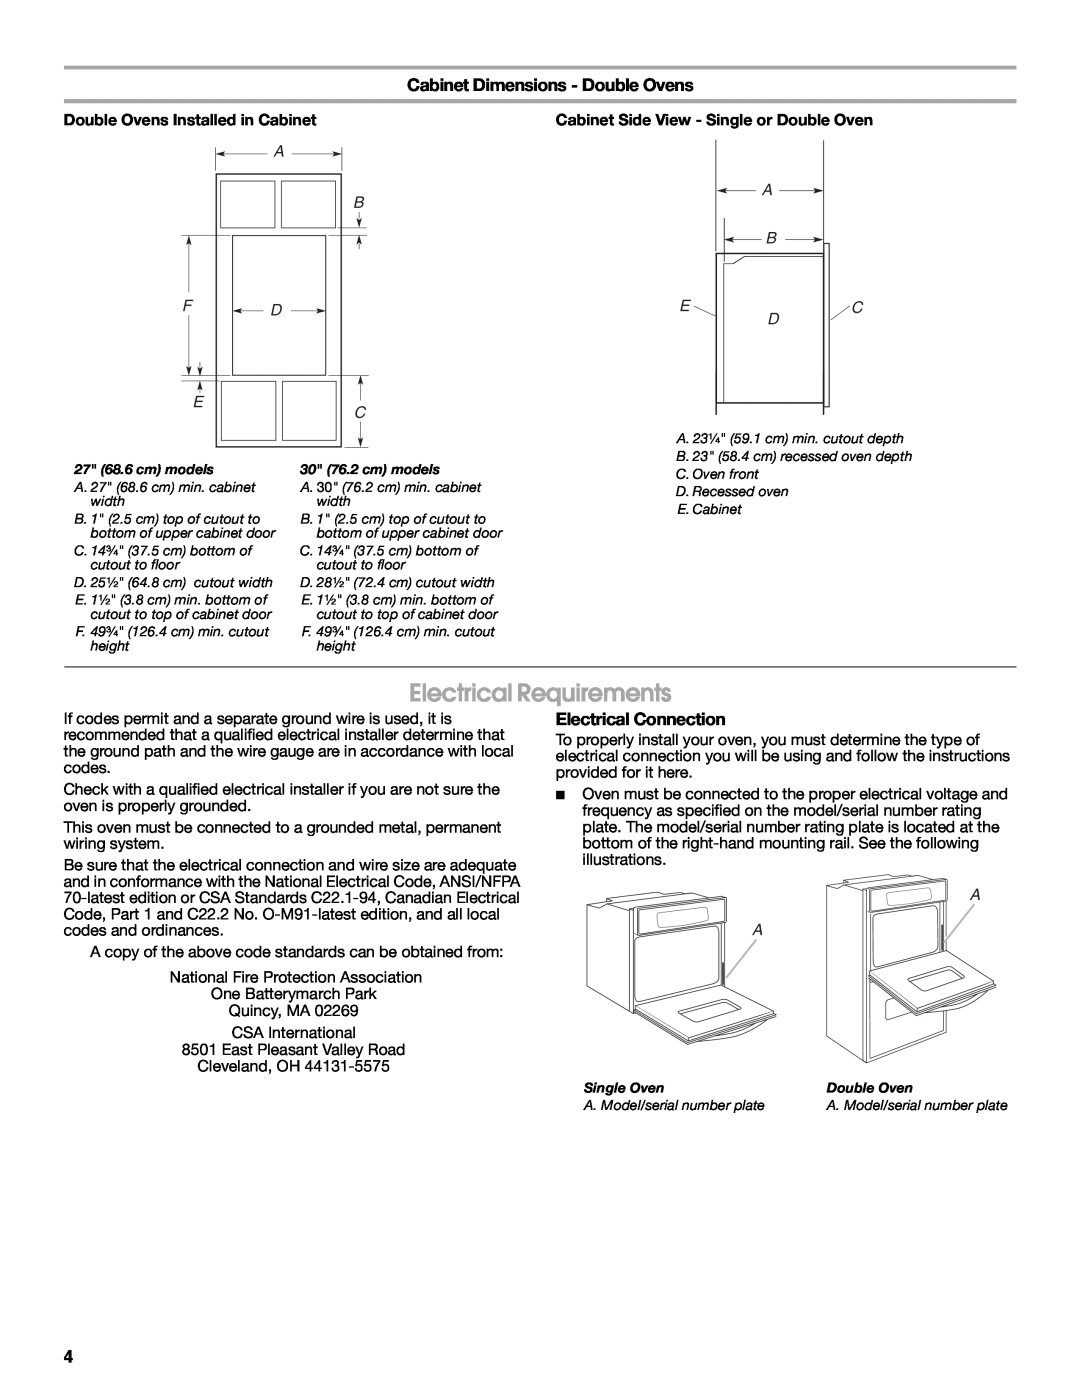 Whirlpool RBS277PV Electrical Requirements, Cabinet Dimensions - Double Ovens, Electrical Connection 